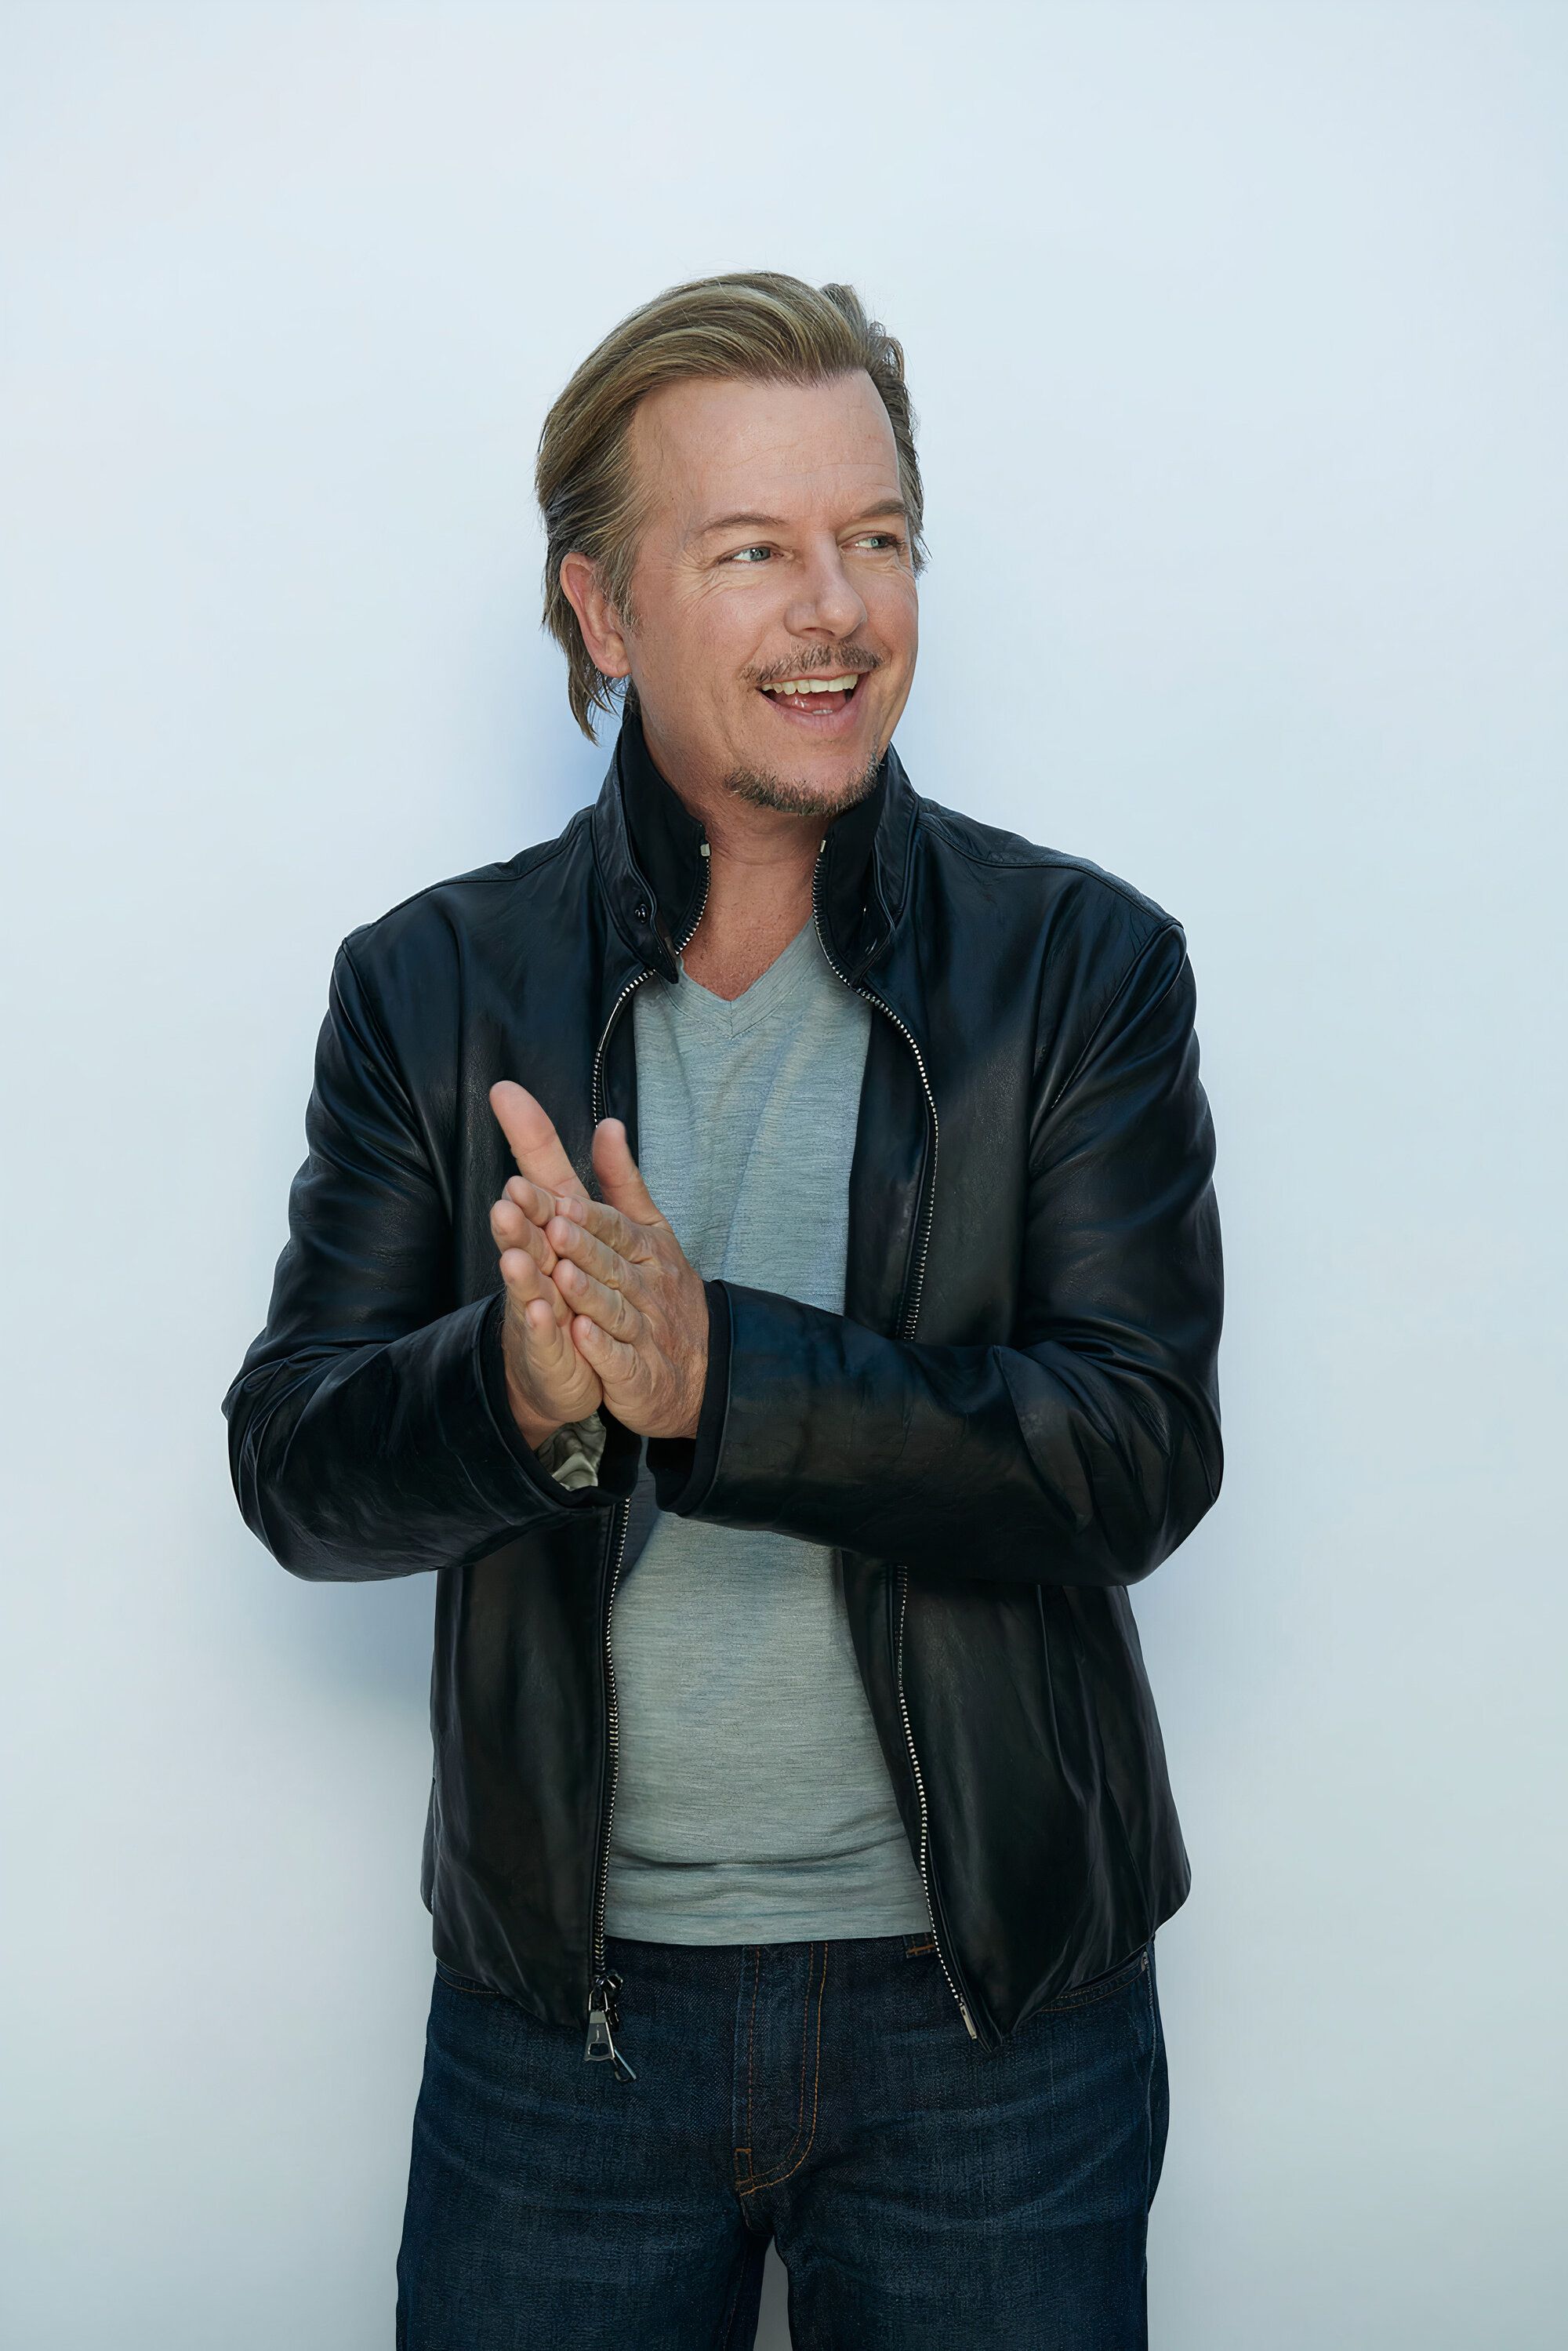 David Spade on New Special, Will Smith Slap, Cancel Culture, SNL